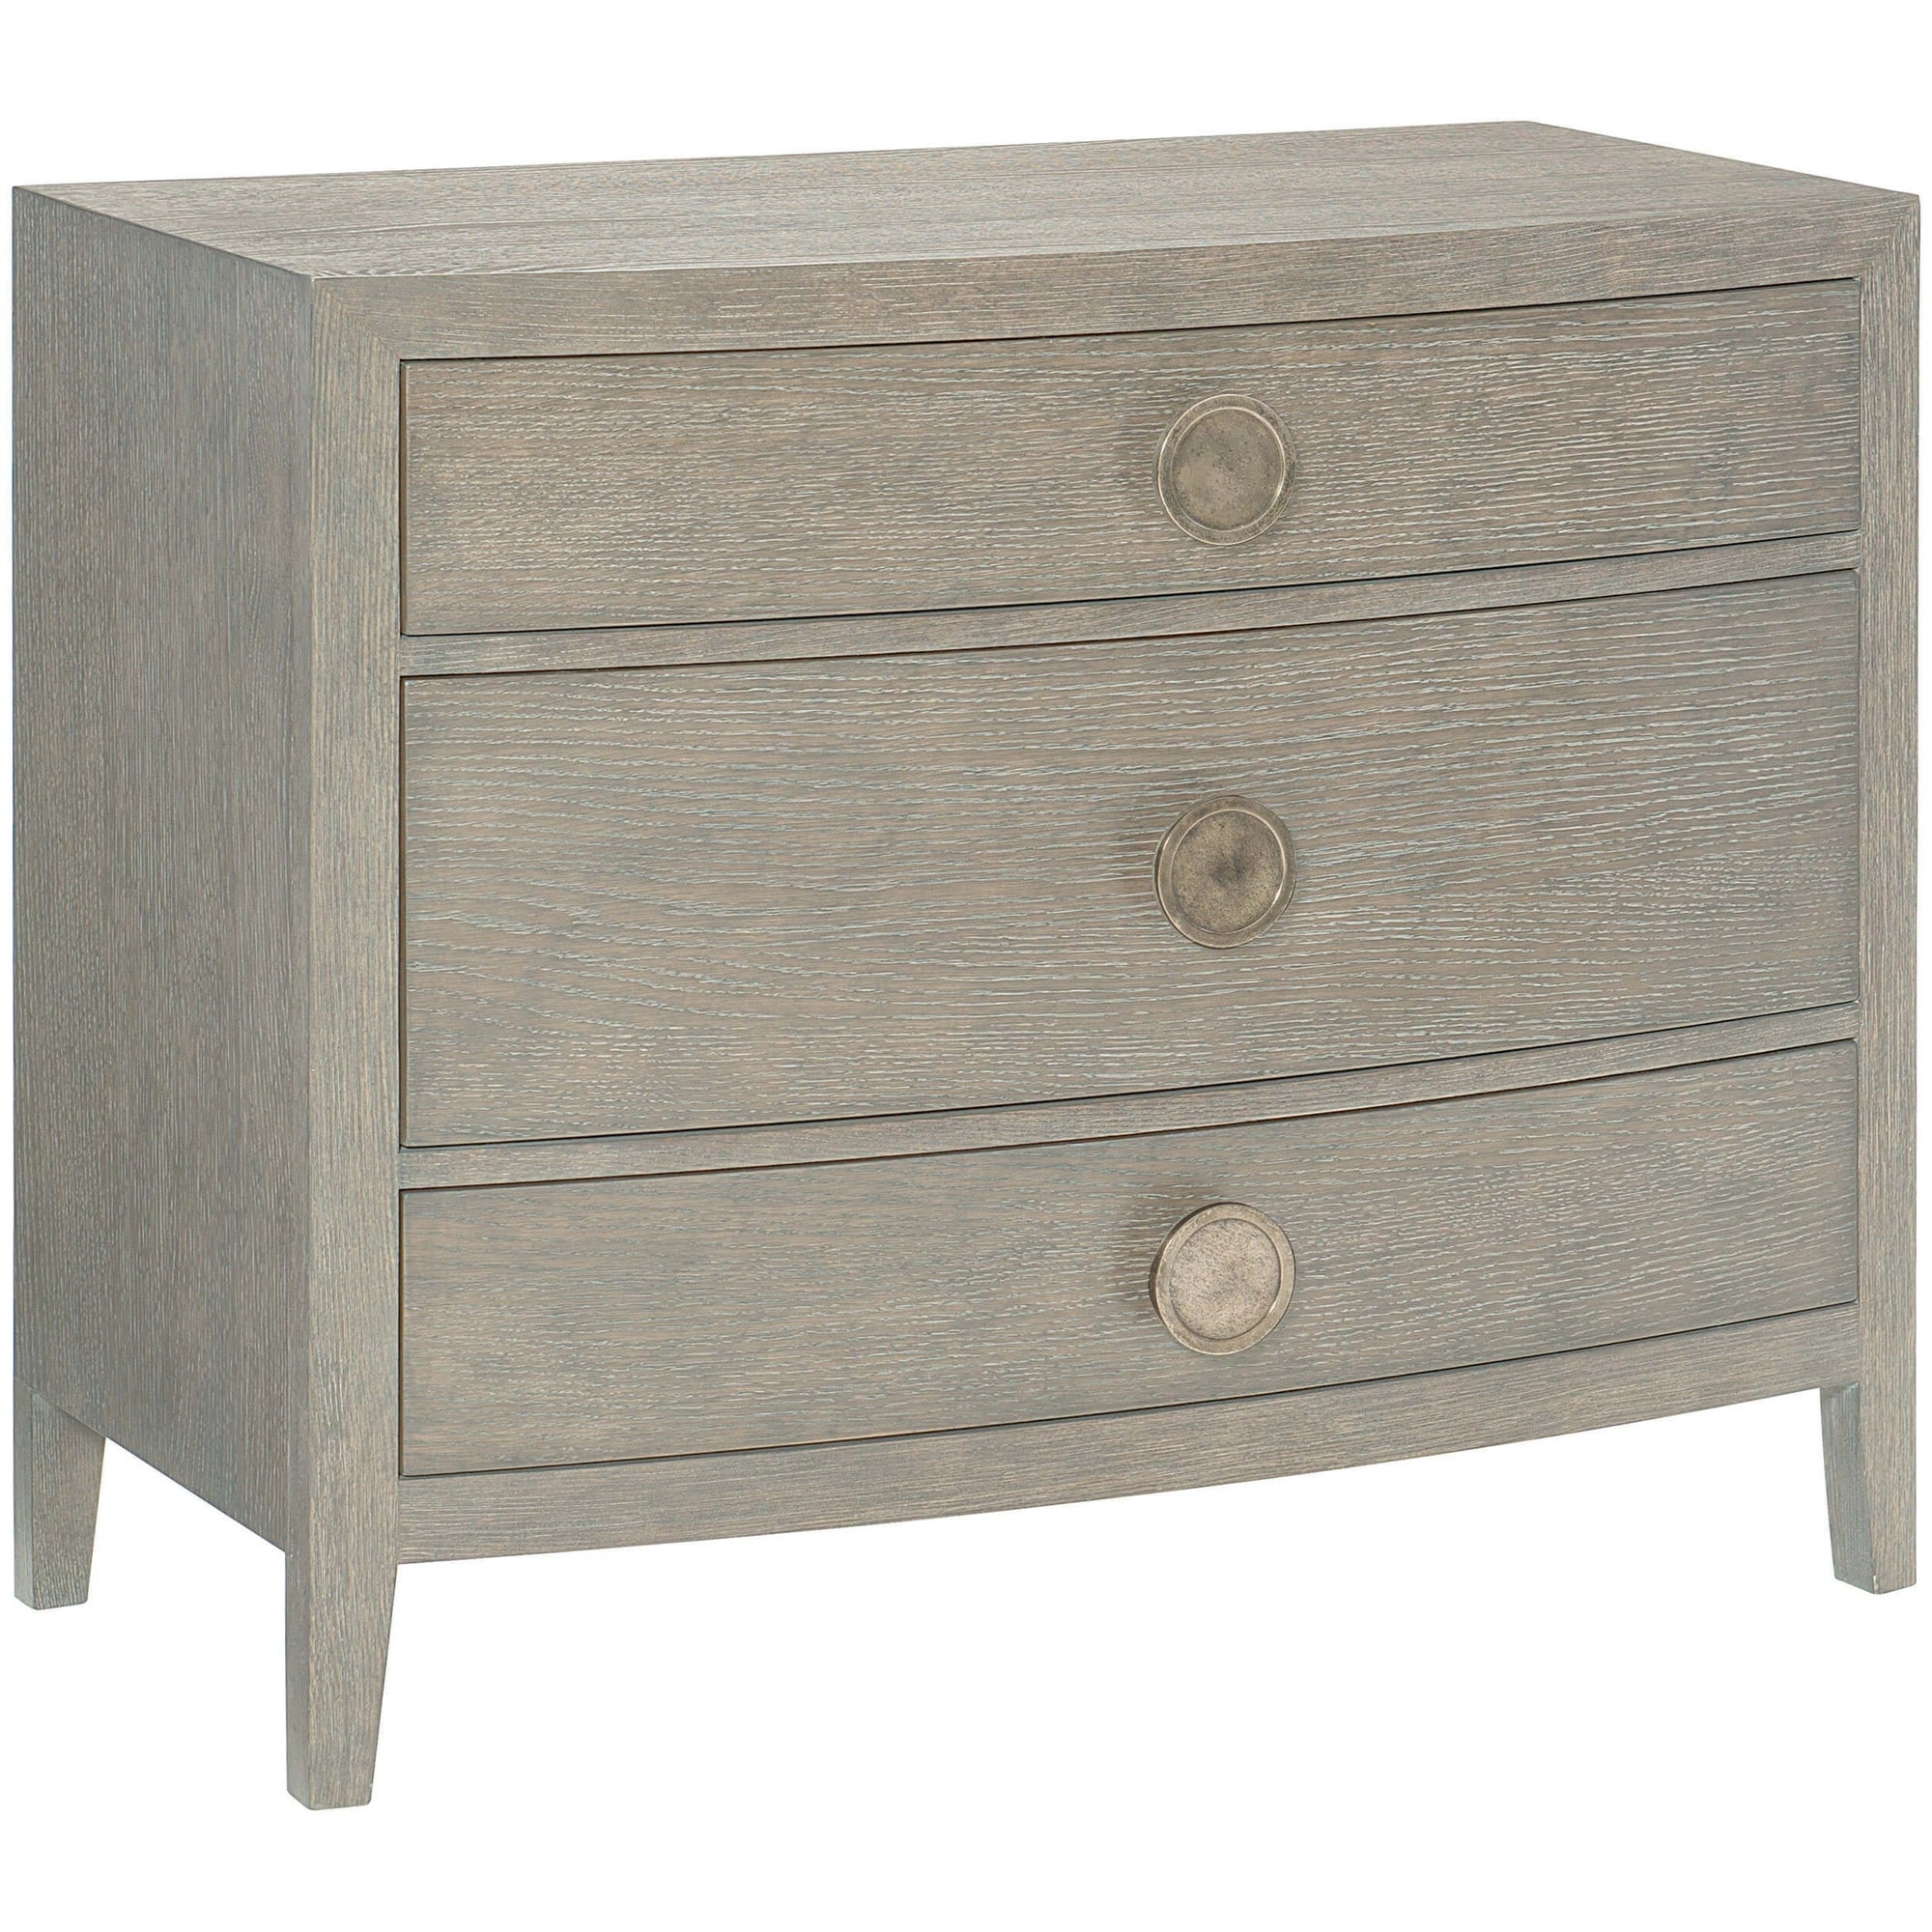 Linea Bachelor S Chest Cerused Greige High Fashion Home